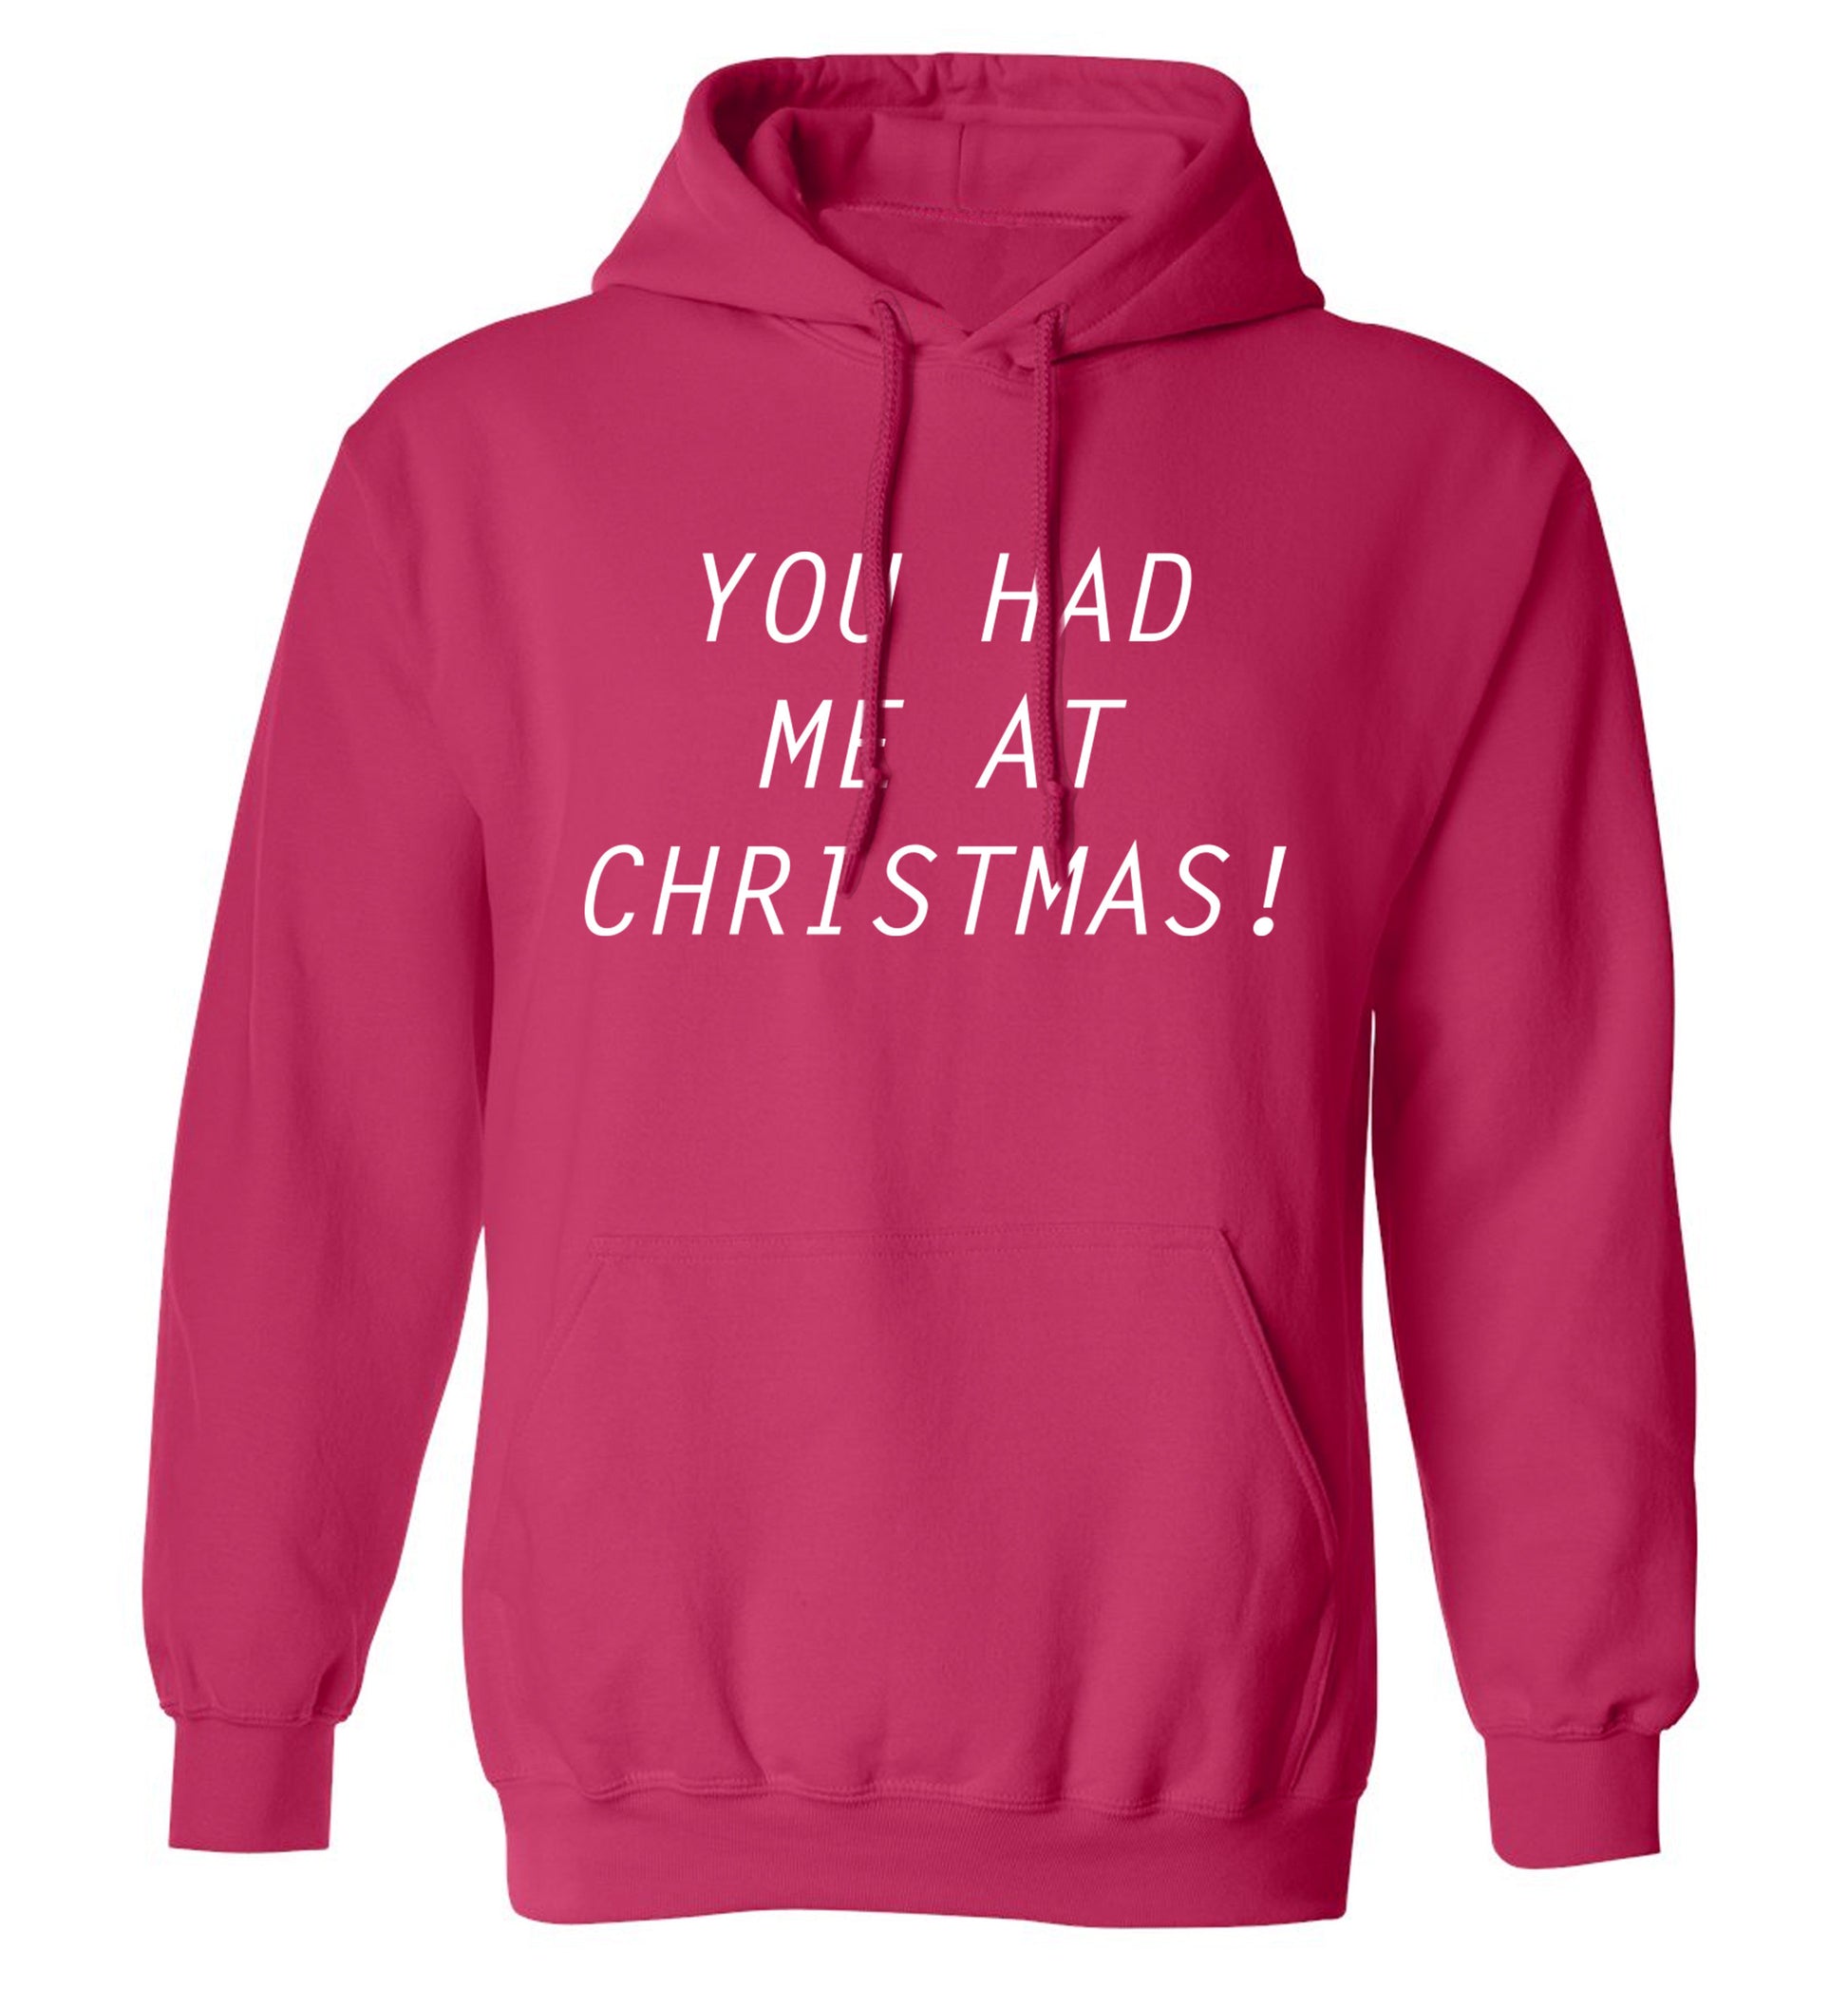 You had me at Christmas adults unisex pink hoodie 2XL